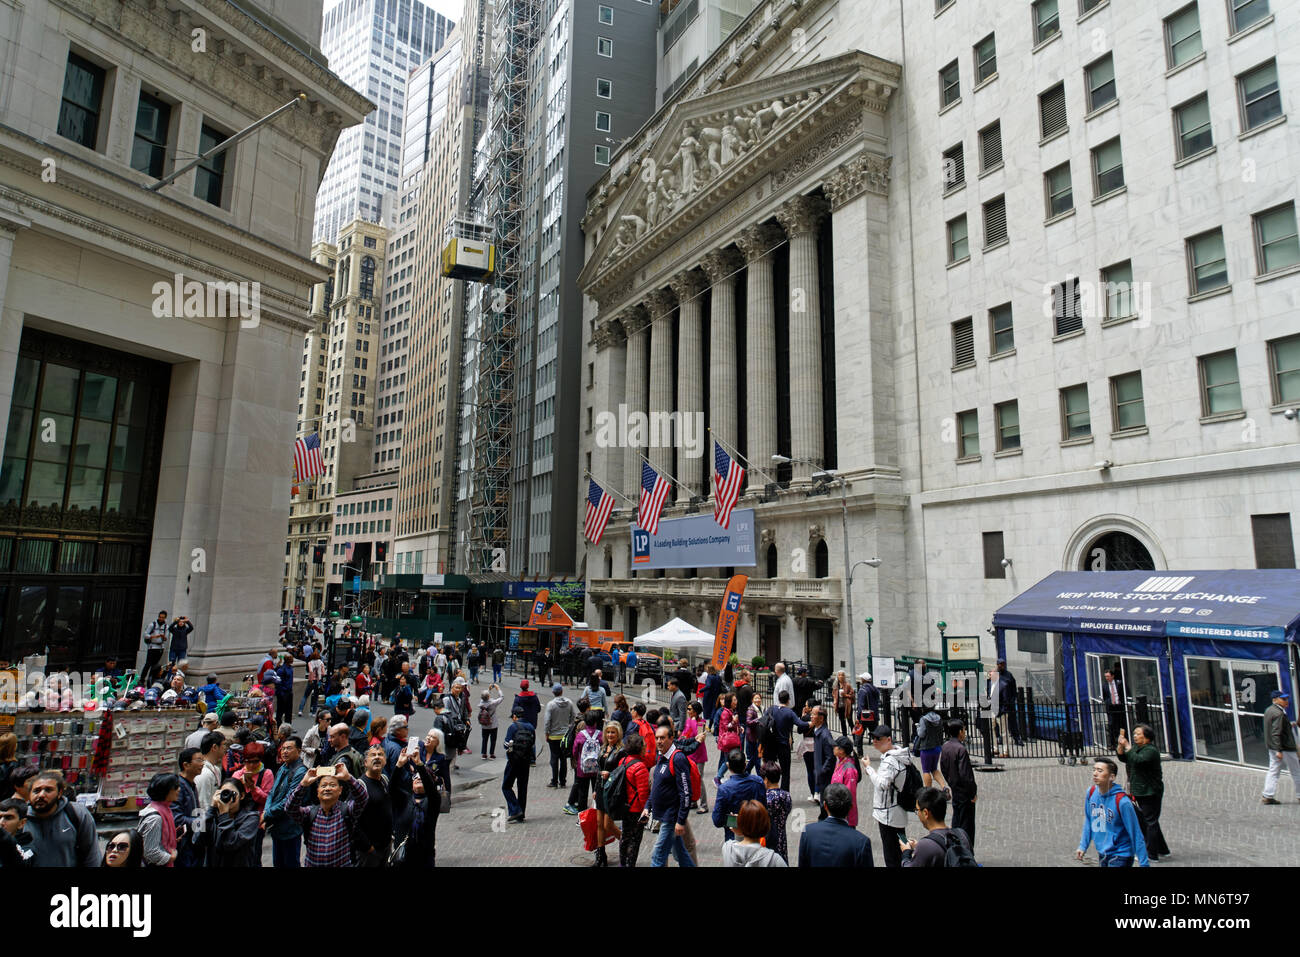 The intersection of Broad and Wall Streets in Manhattan’s Financial District is usually crowded with tourists, office workers and residents. Stock Photo